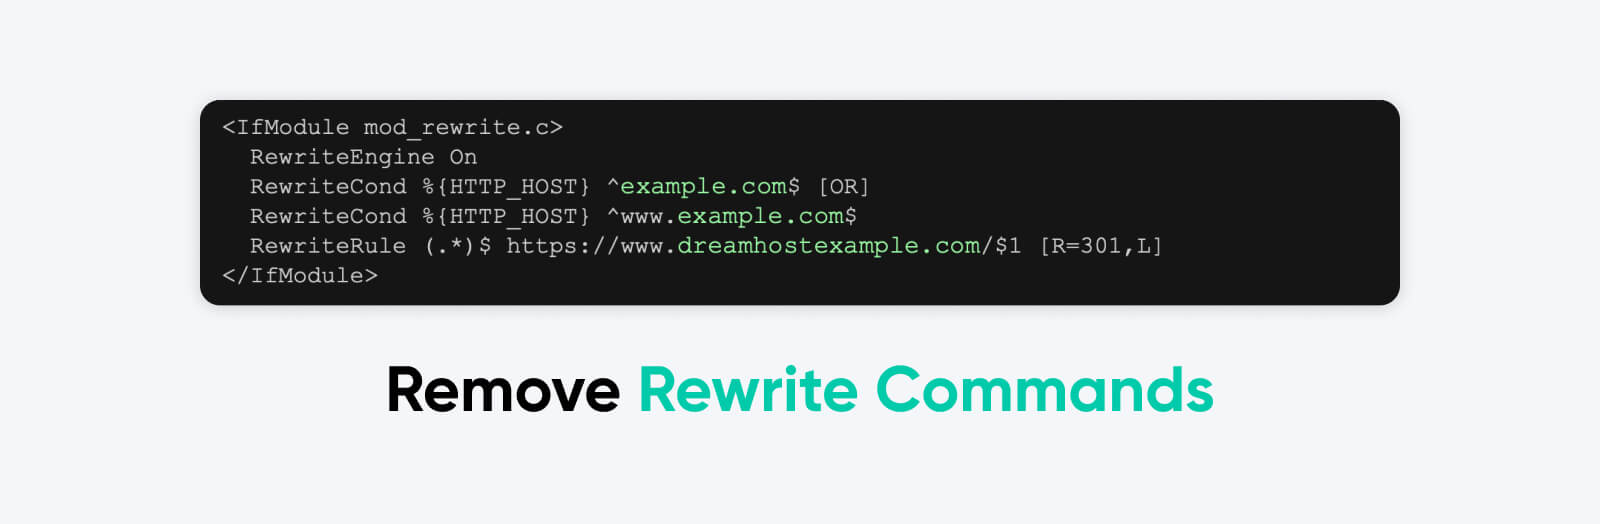 You can try to remove Rewrite Commands.